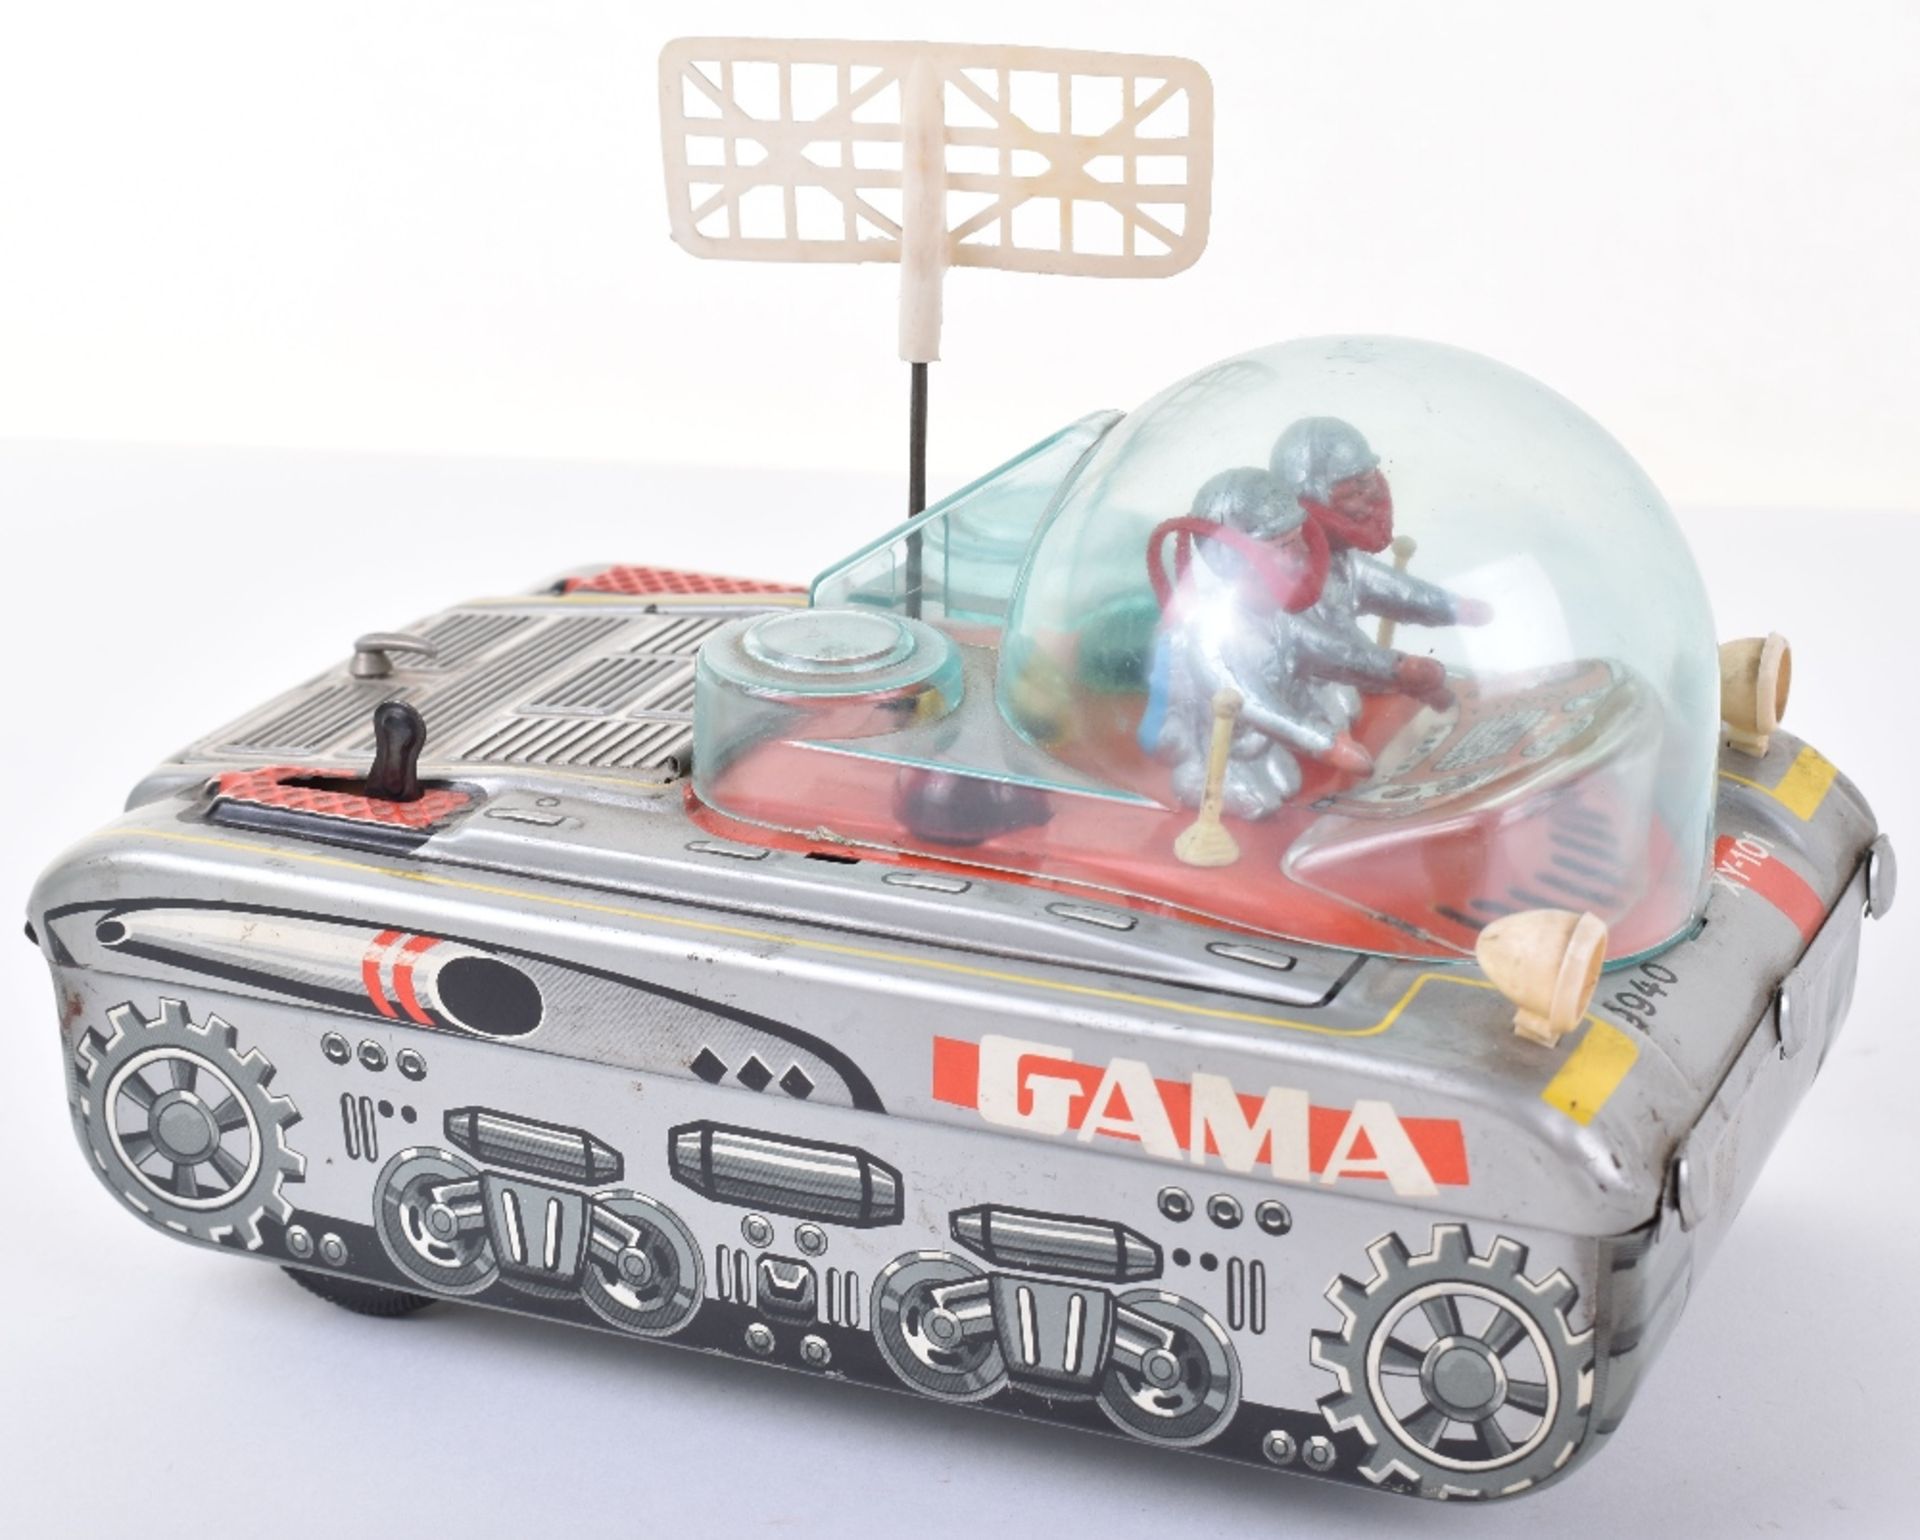 Gama 9940 XY-101 Space Tank tinplate battery operated toy, Western Germany 1960s - Image 2 of 4